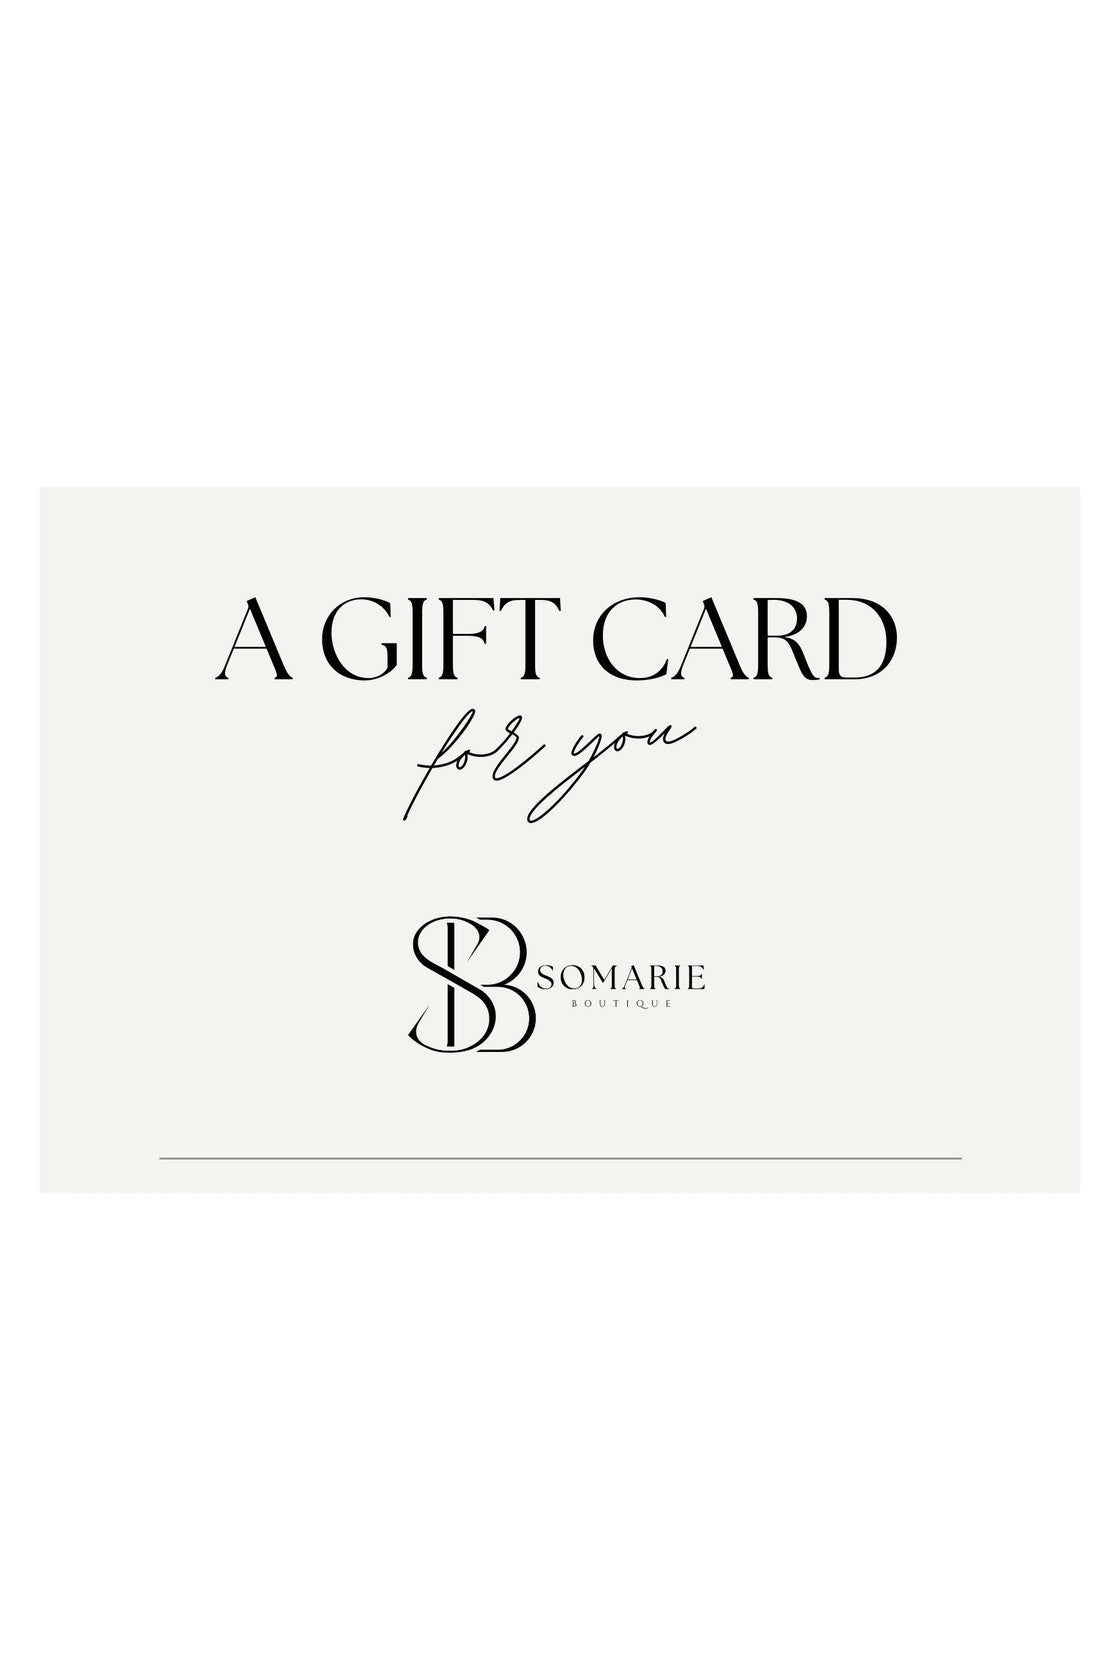 Somarie Boutique Gift Card